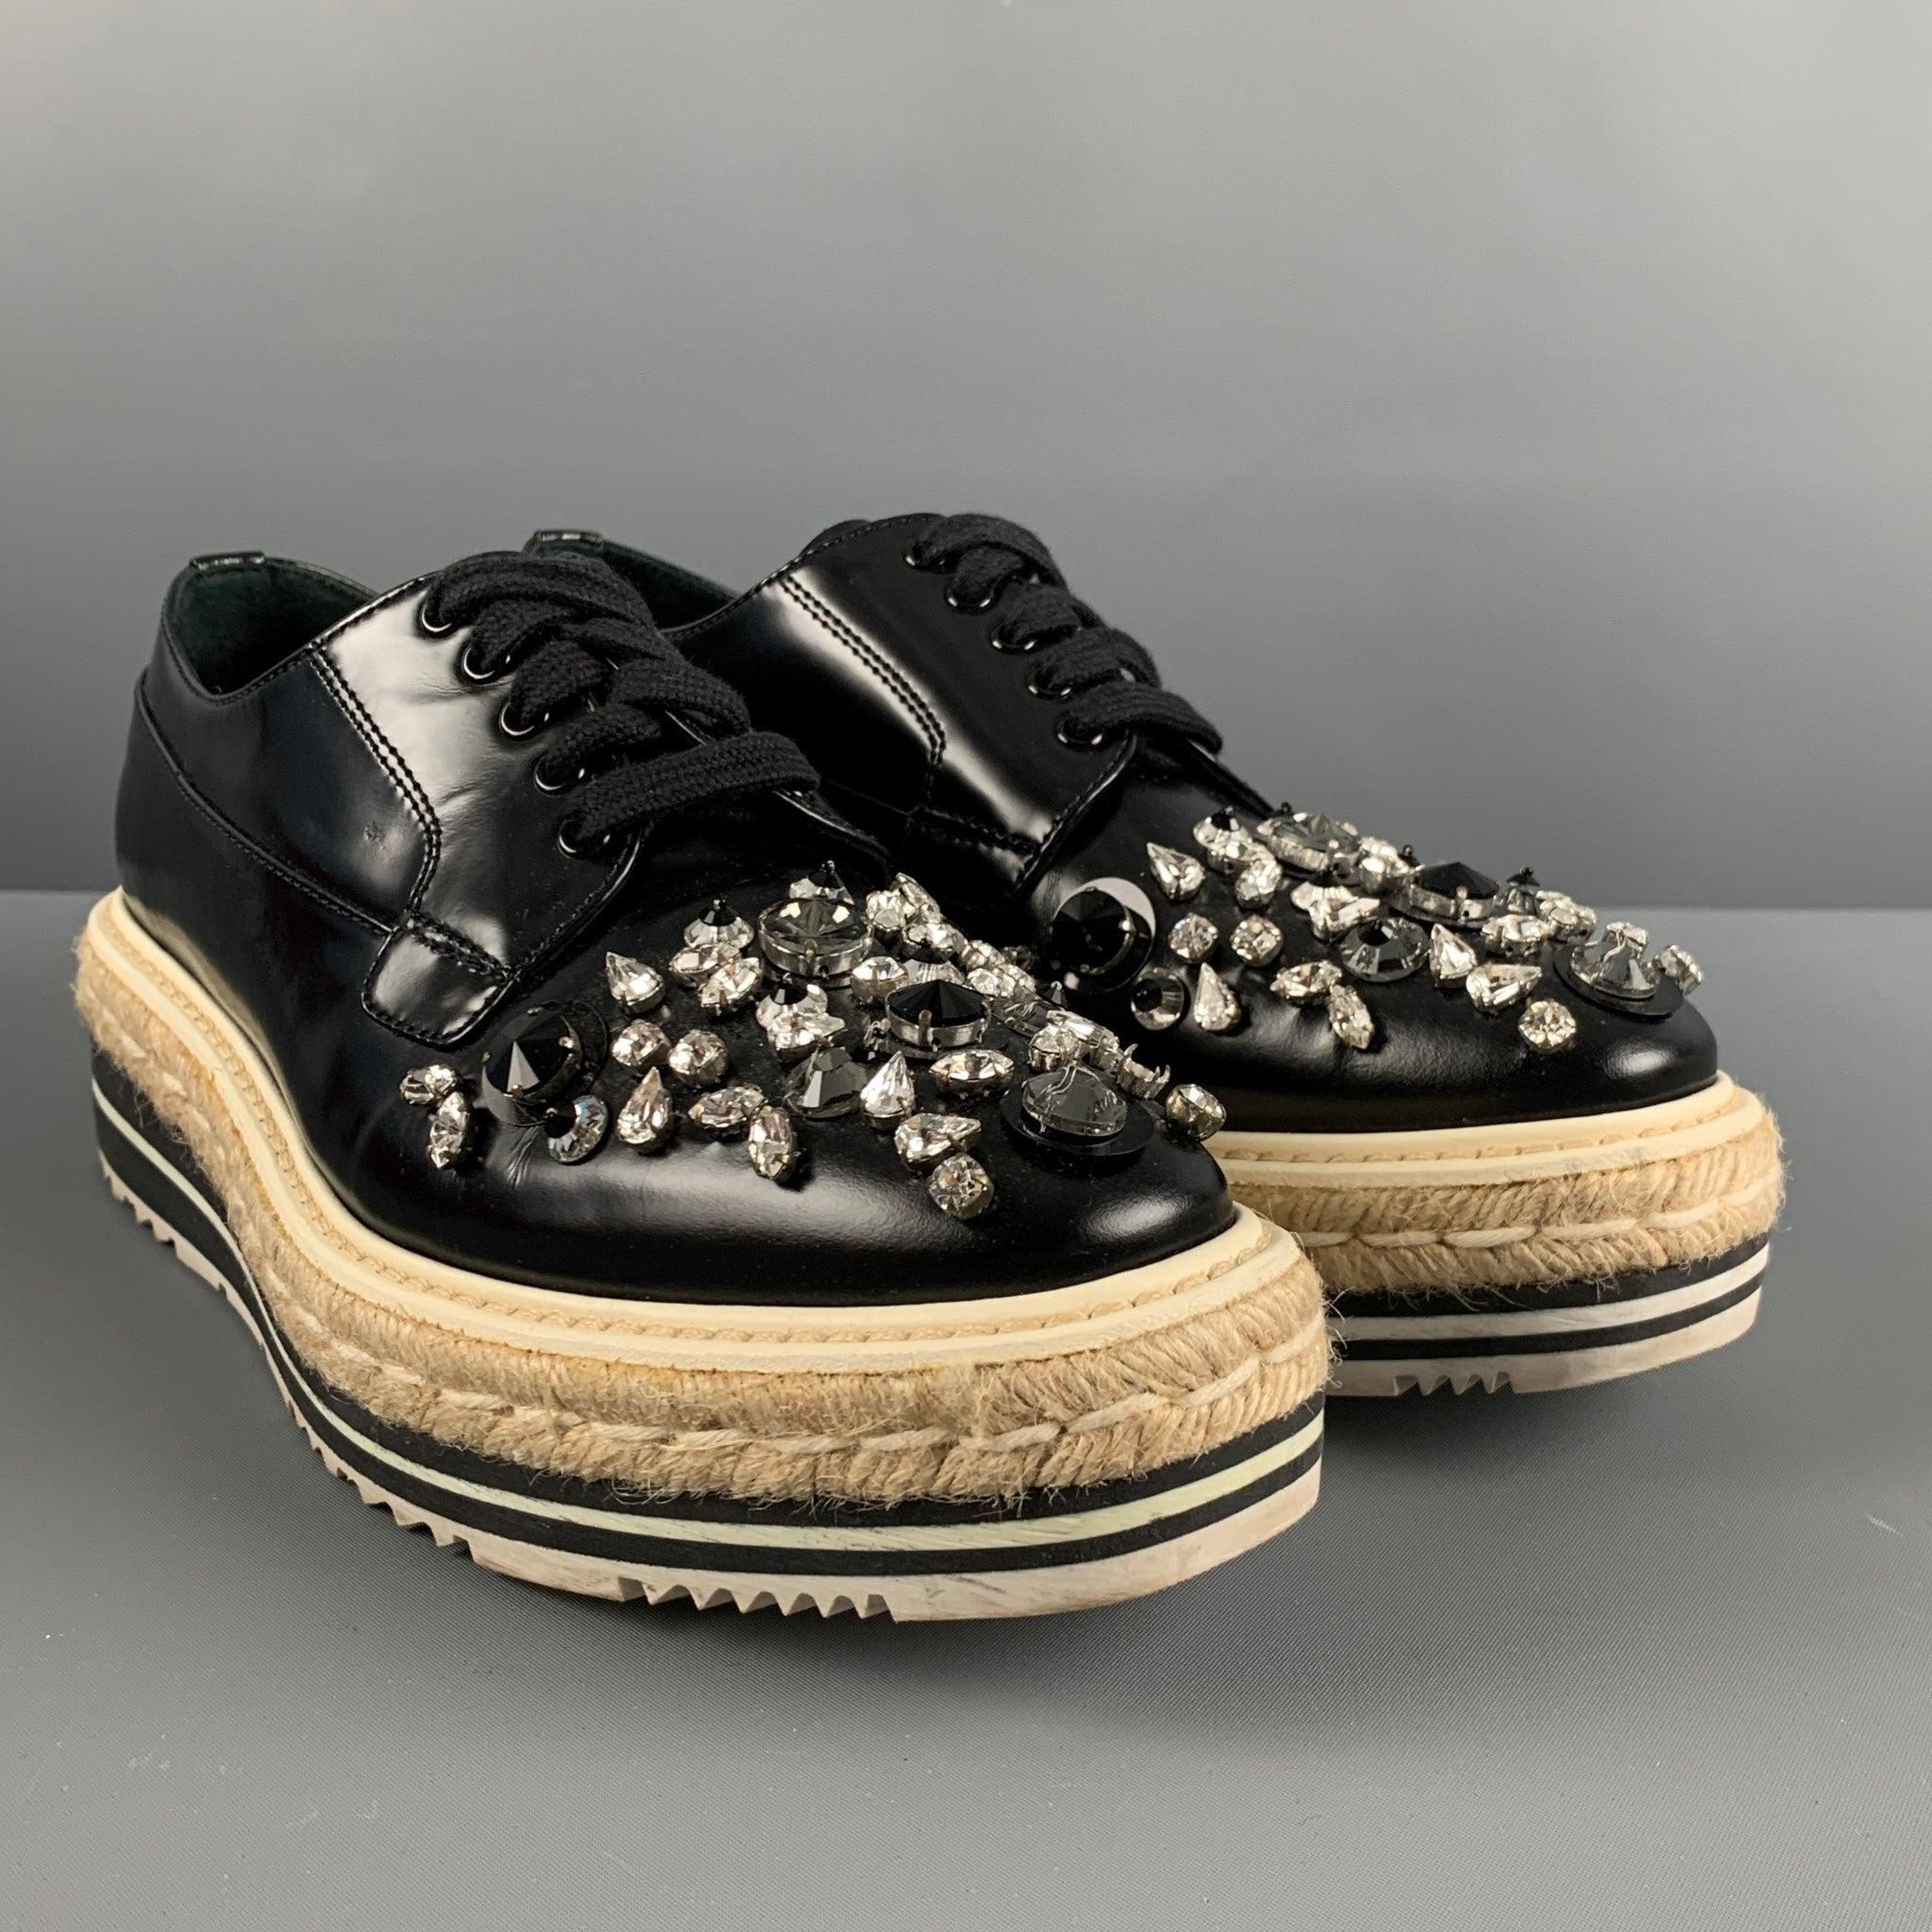 PRADA shoes comes in a black leather featuring rhinestone details, rubber sole, woven espadrilles detail, and a lace up closure. Made in Italy. Comes with The box.Very Good Pre- Owned Closure. 

Marked:   37.5Outsole: 10.75 inches  x 4 inches  
  
 